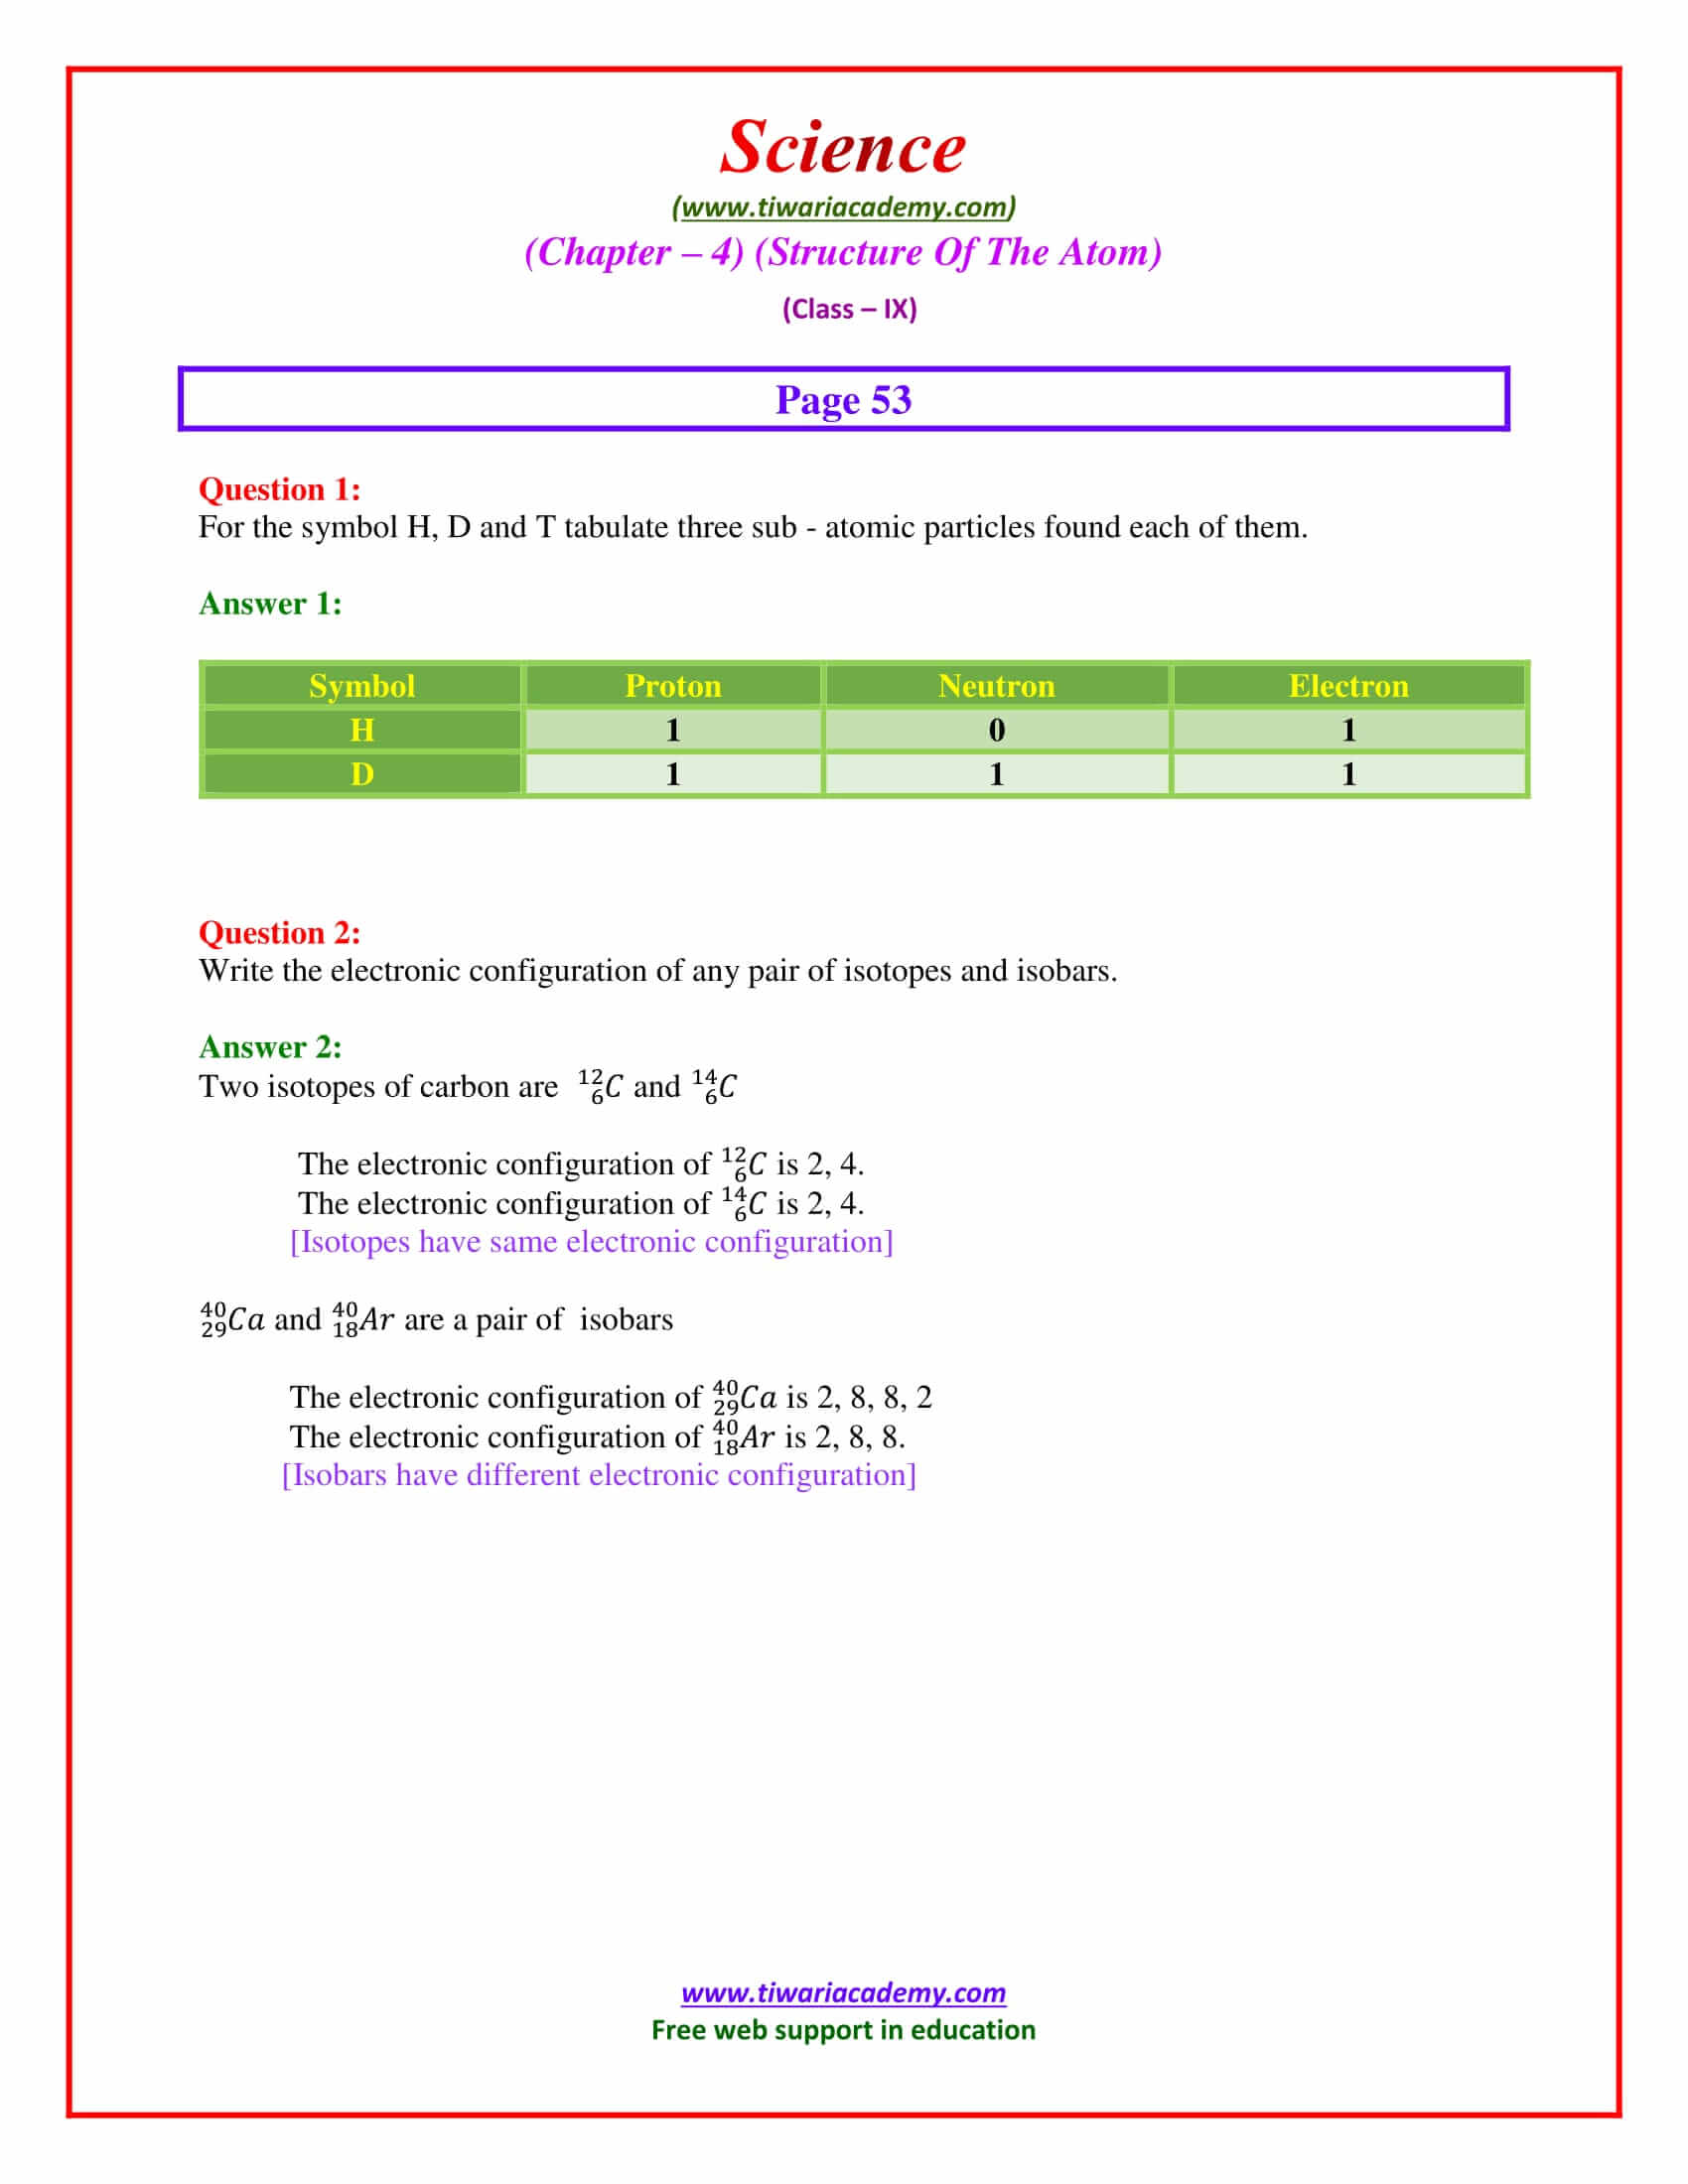 NCERT Solutions for Class 9 Science Chapter 4 intext questions page 53